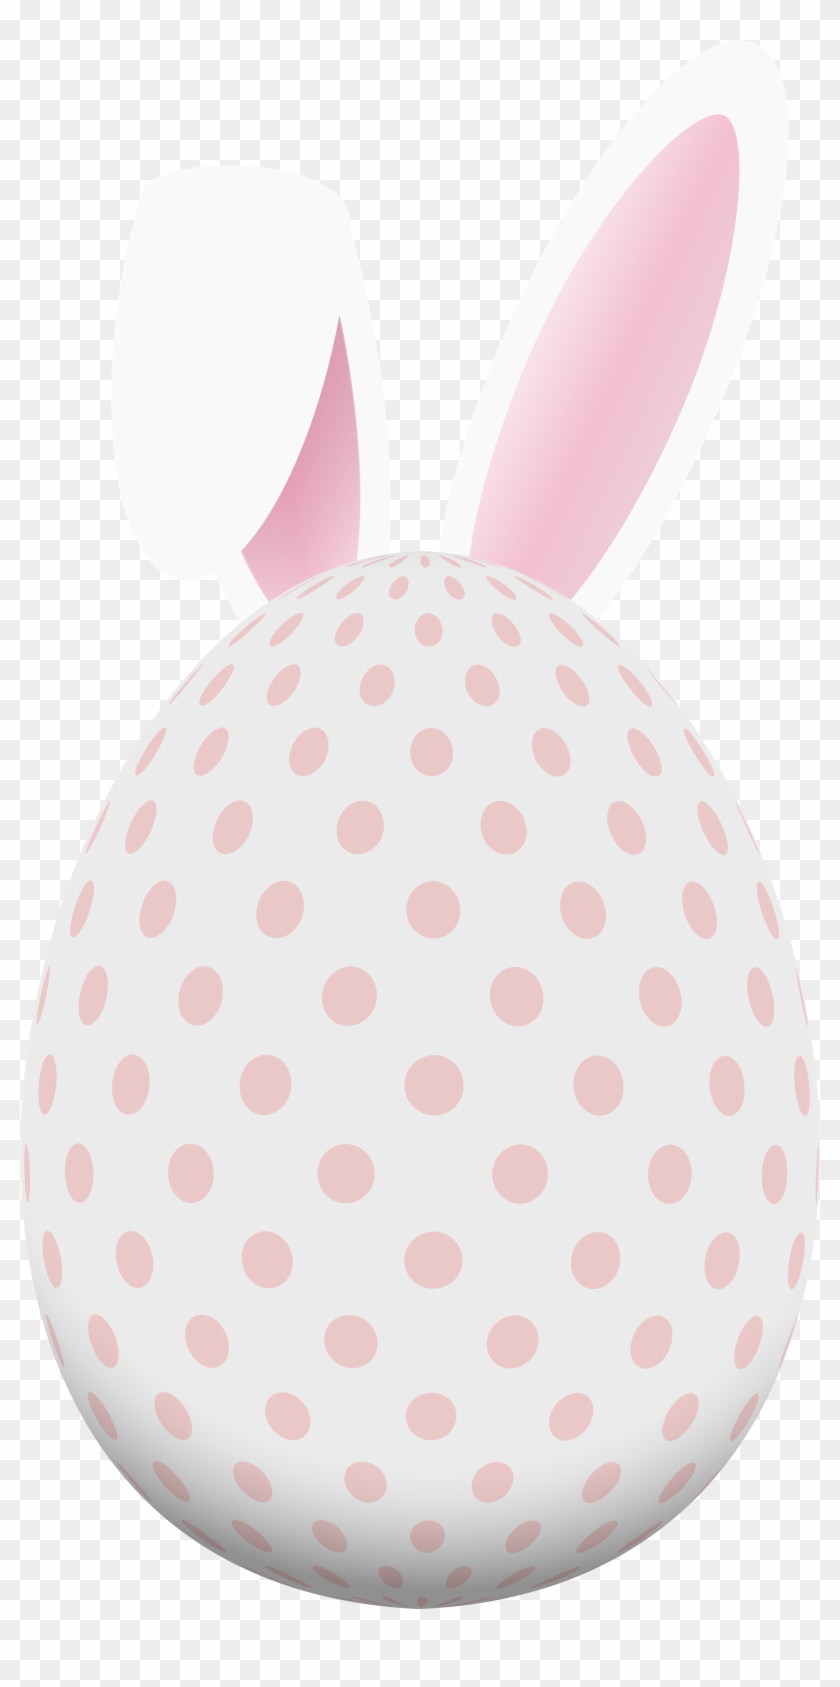 Bunny Png Egg With Clip Royalty Free - Bunny Png Egg With Clip Royalty Free #1704031